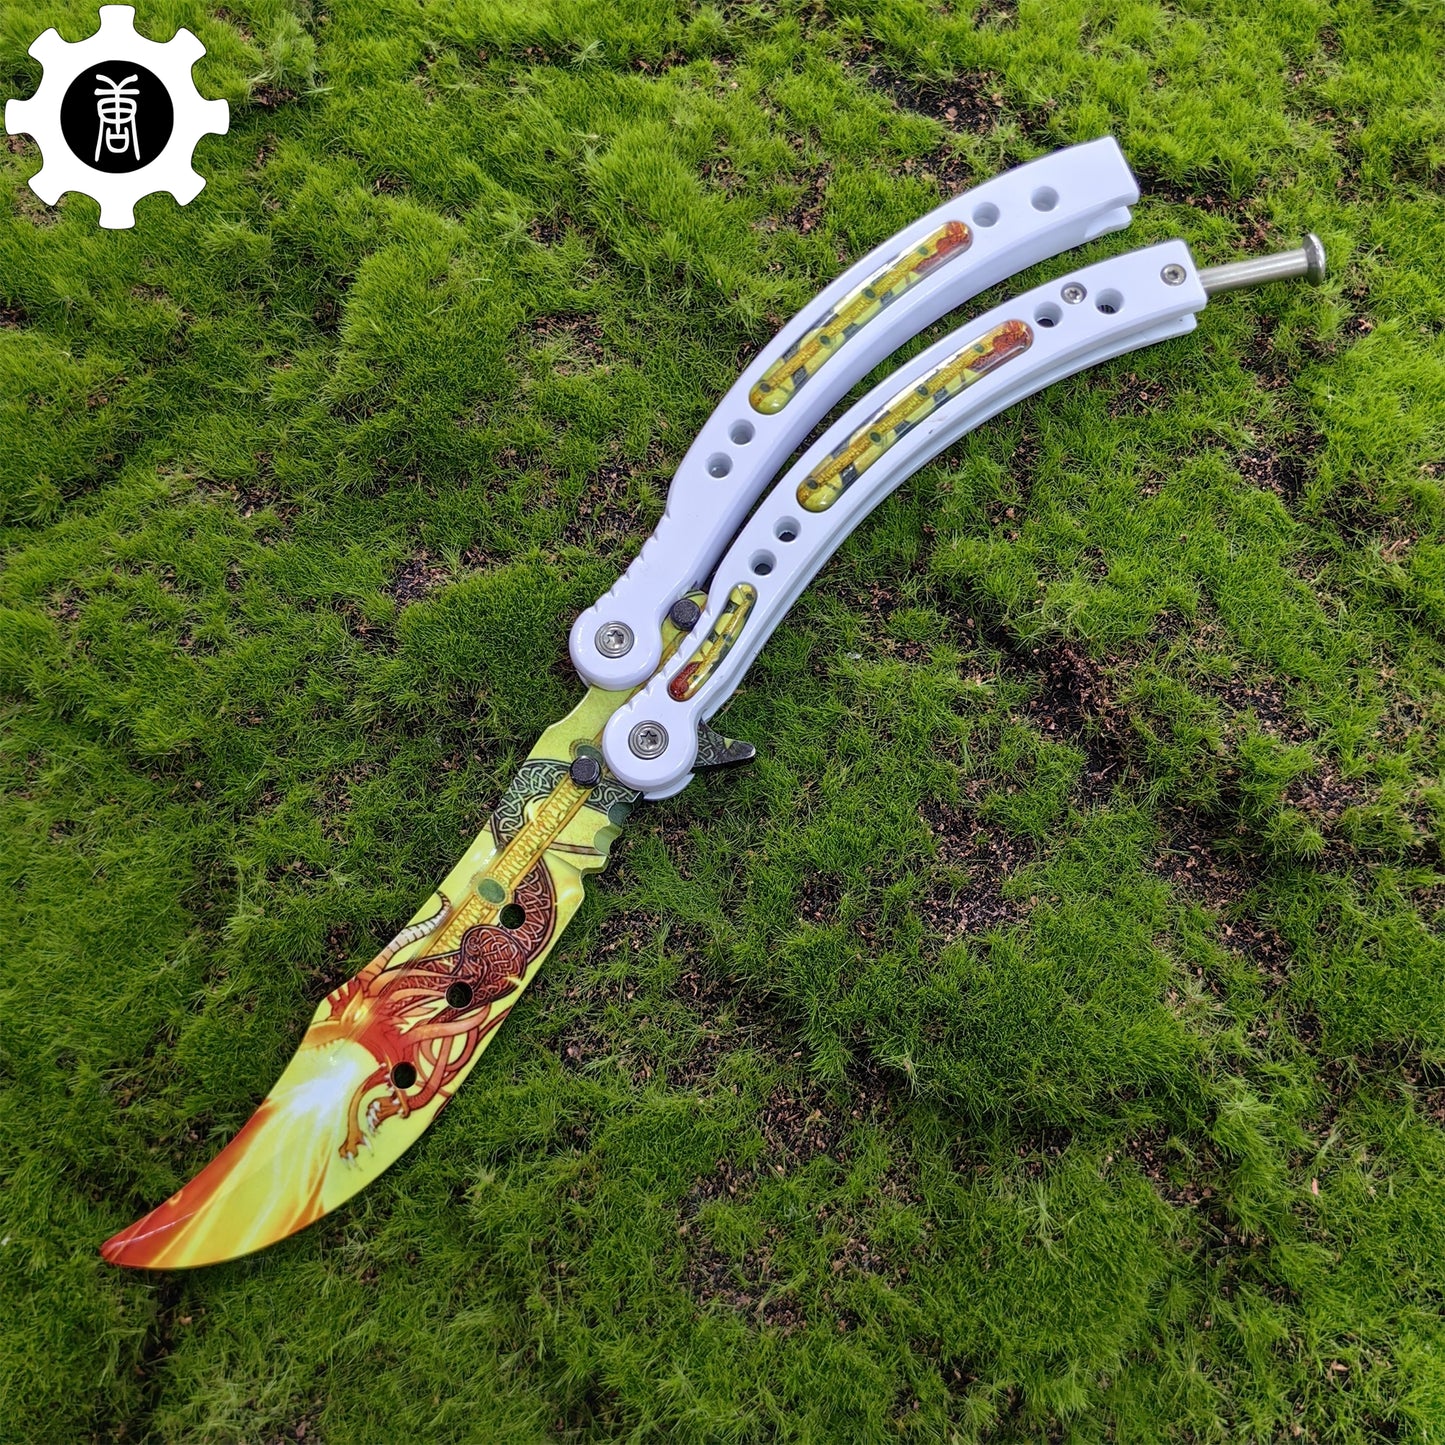 Dragon Lore Butterfly Knife Metal Balisong Game Prop